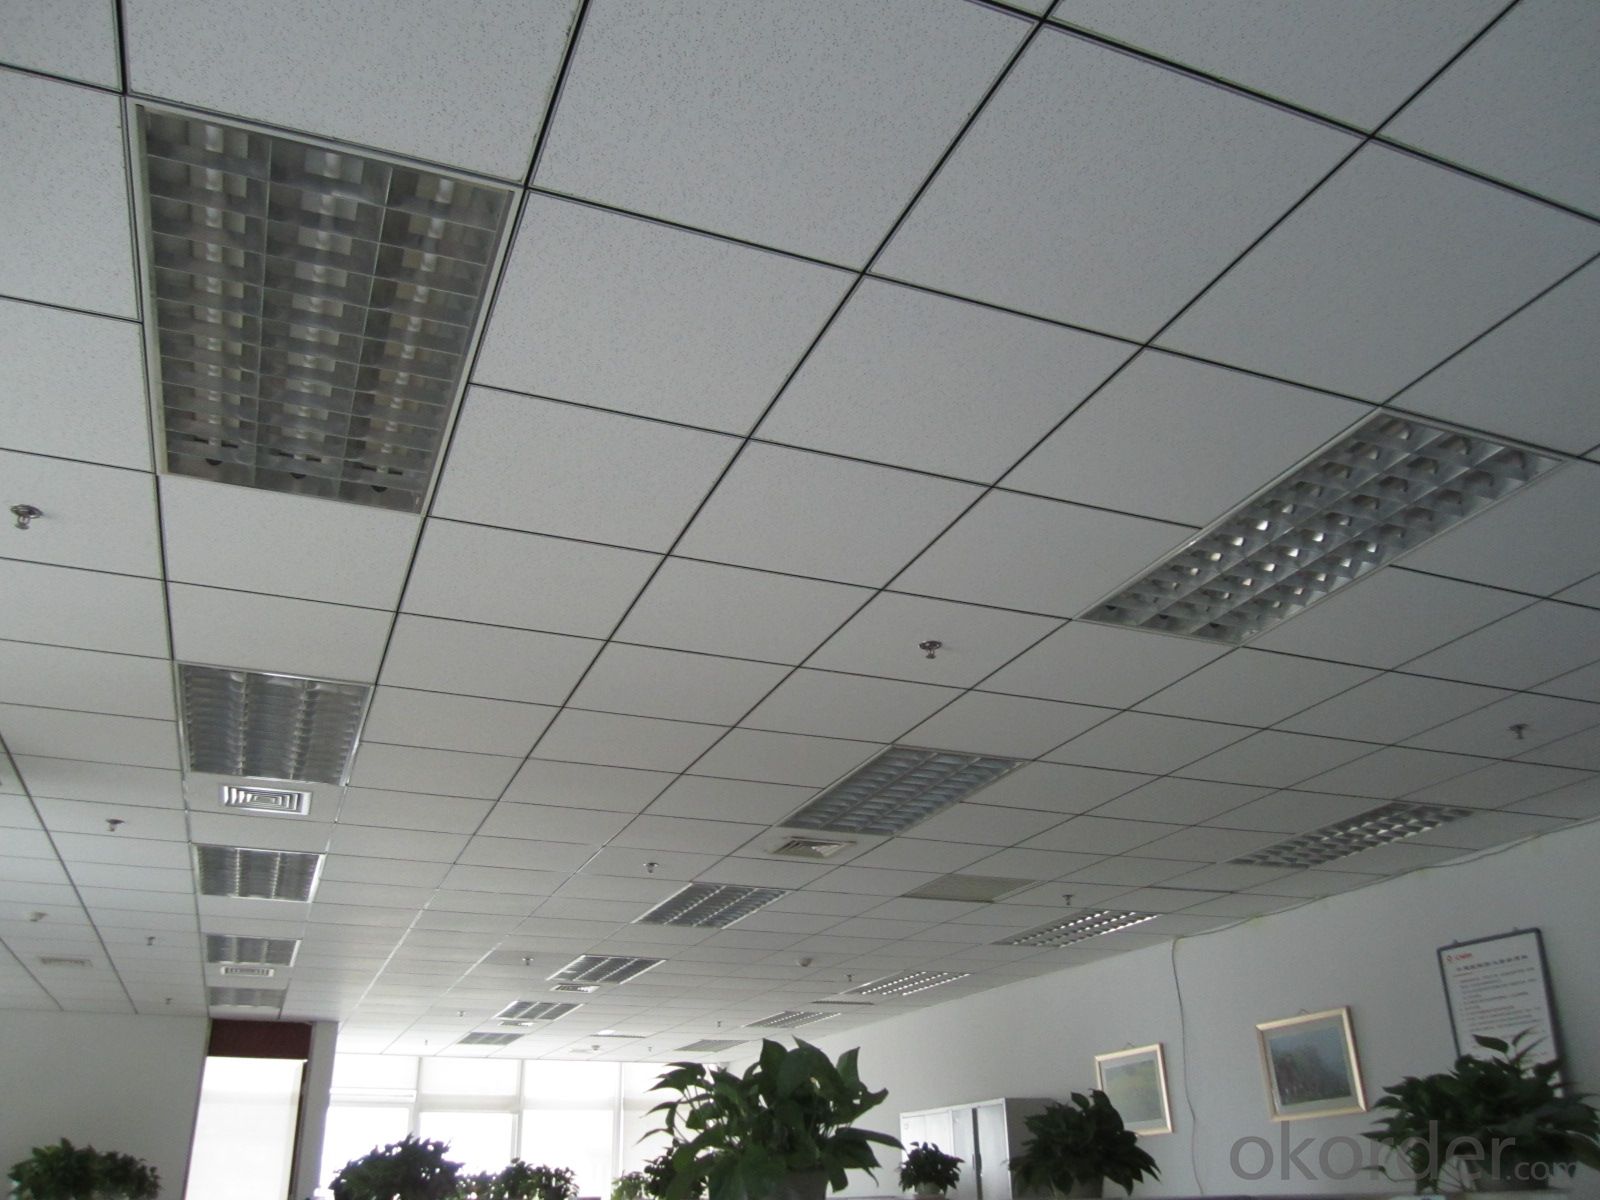 Acoustic Mineral Fiber Ceiling Tiles realtime quotes, lastsale prices